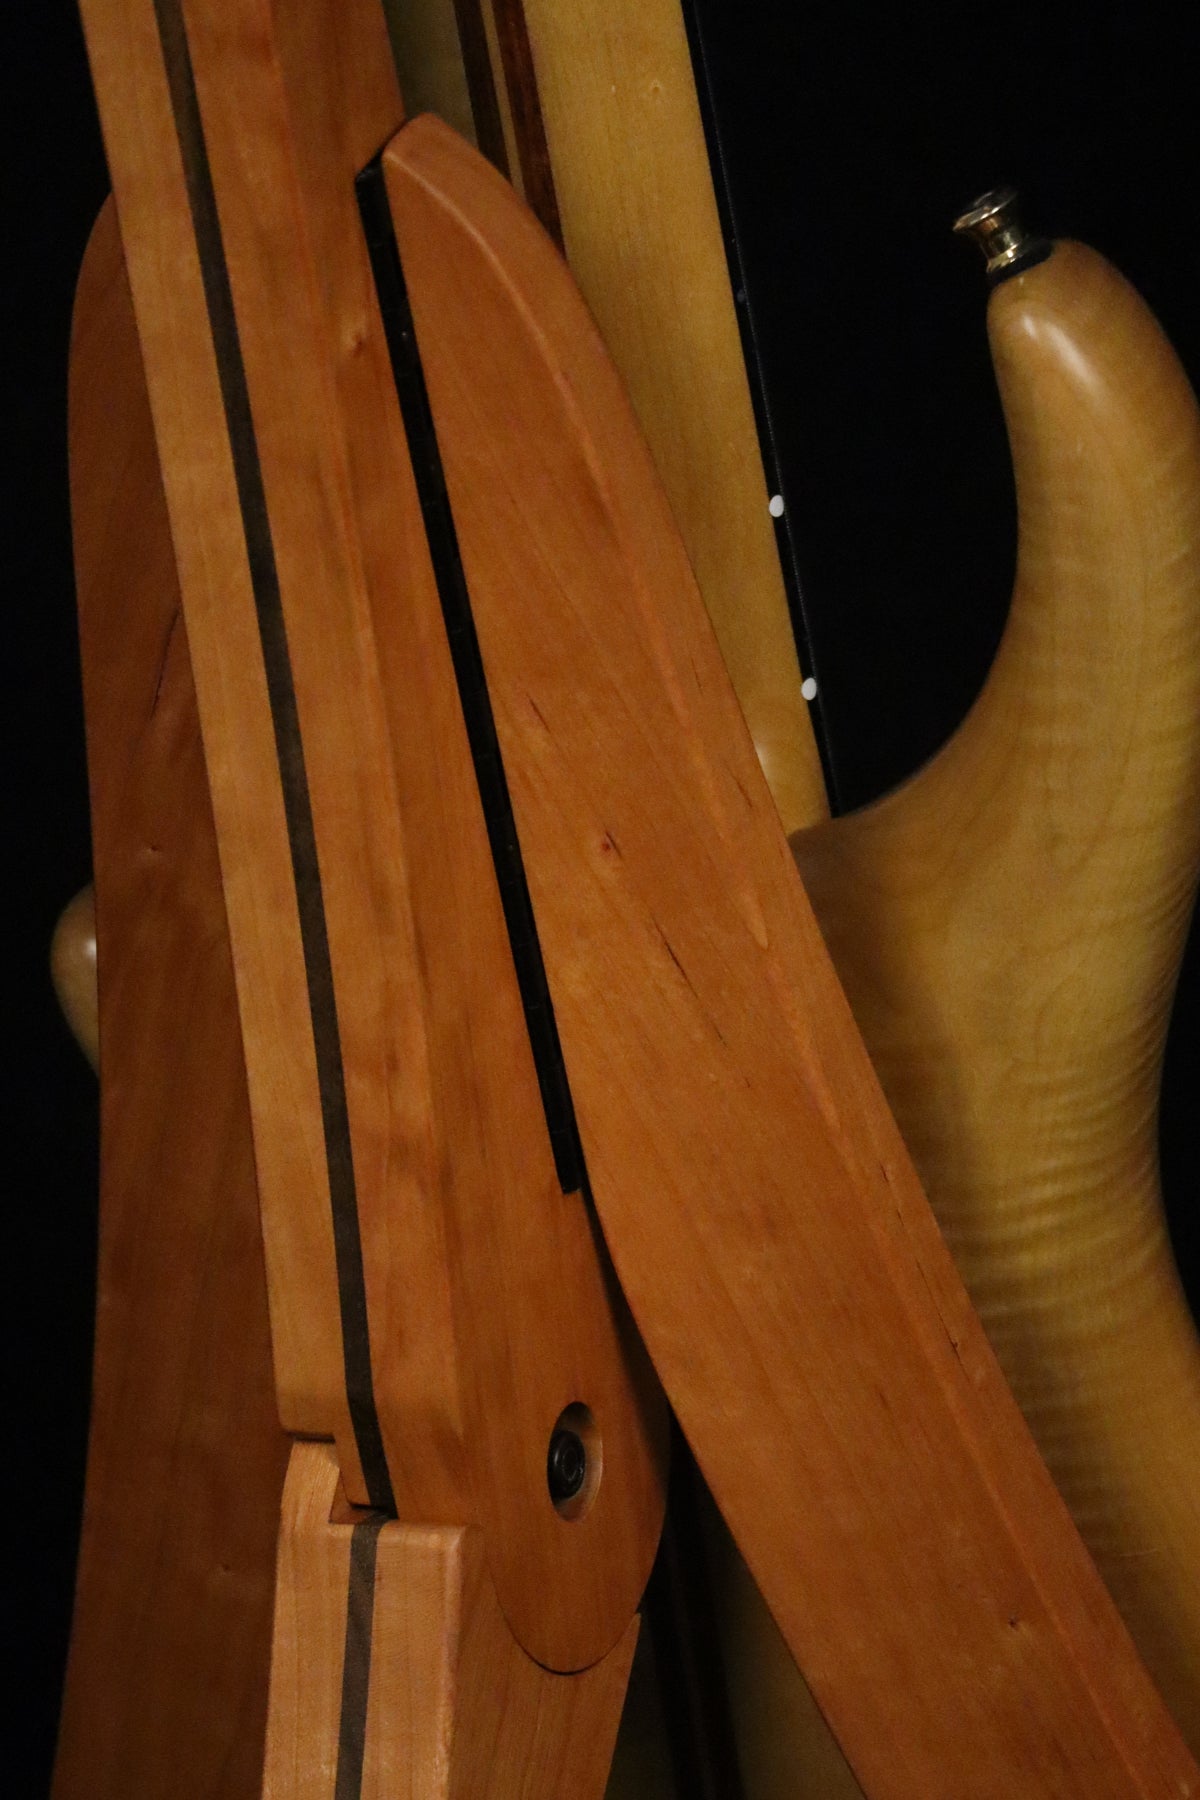 Folding cherry and walnut wood electric bass guitar floor stand closeup rear image